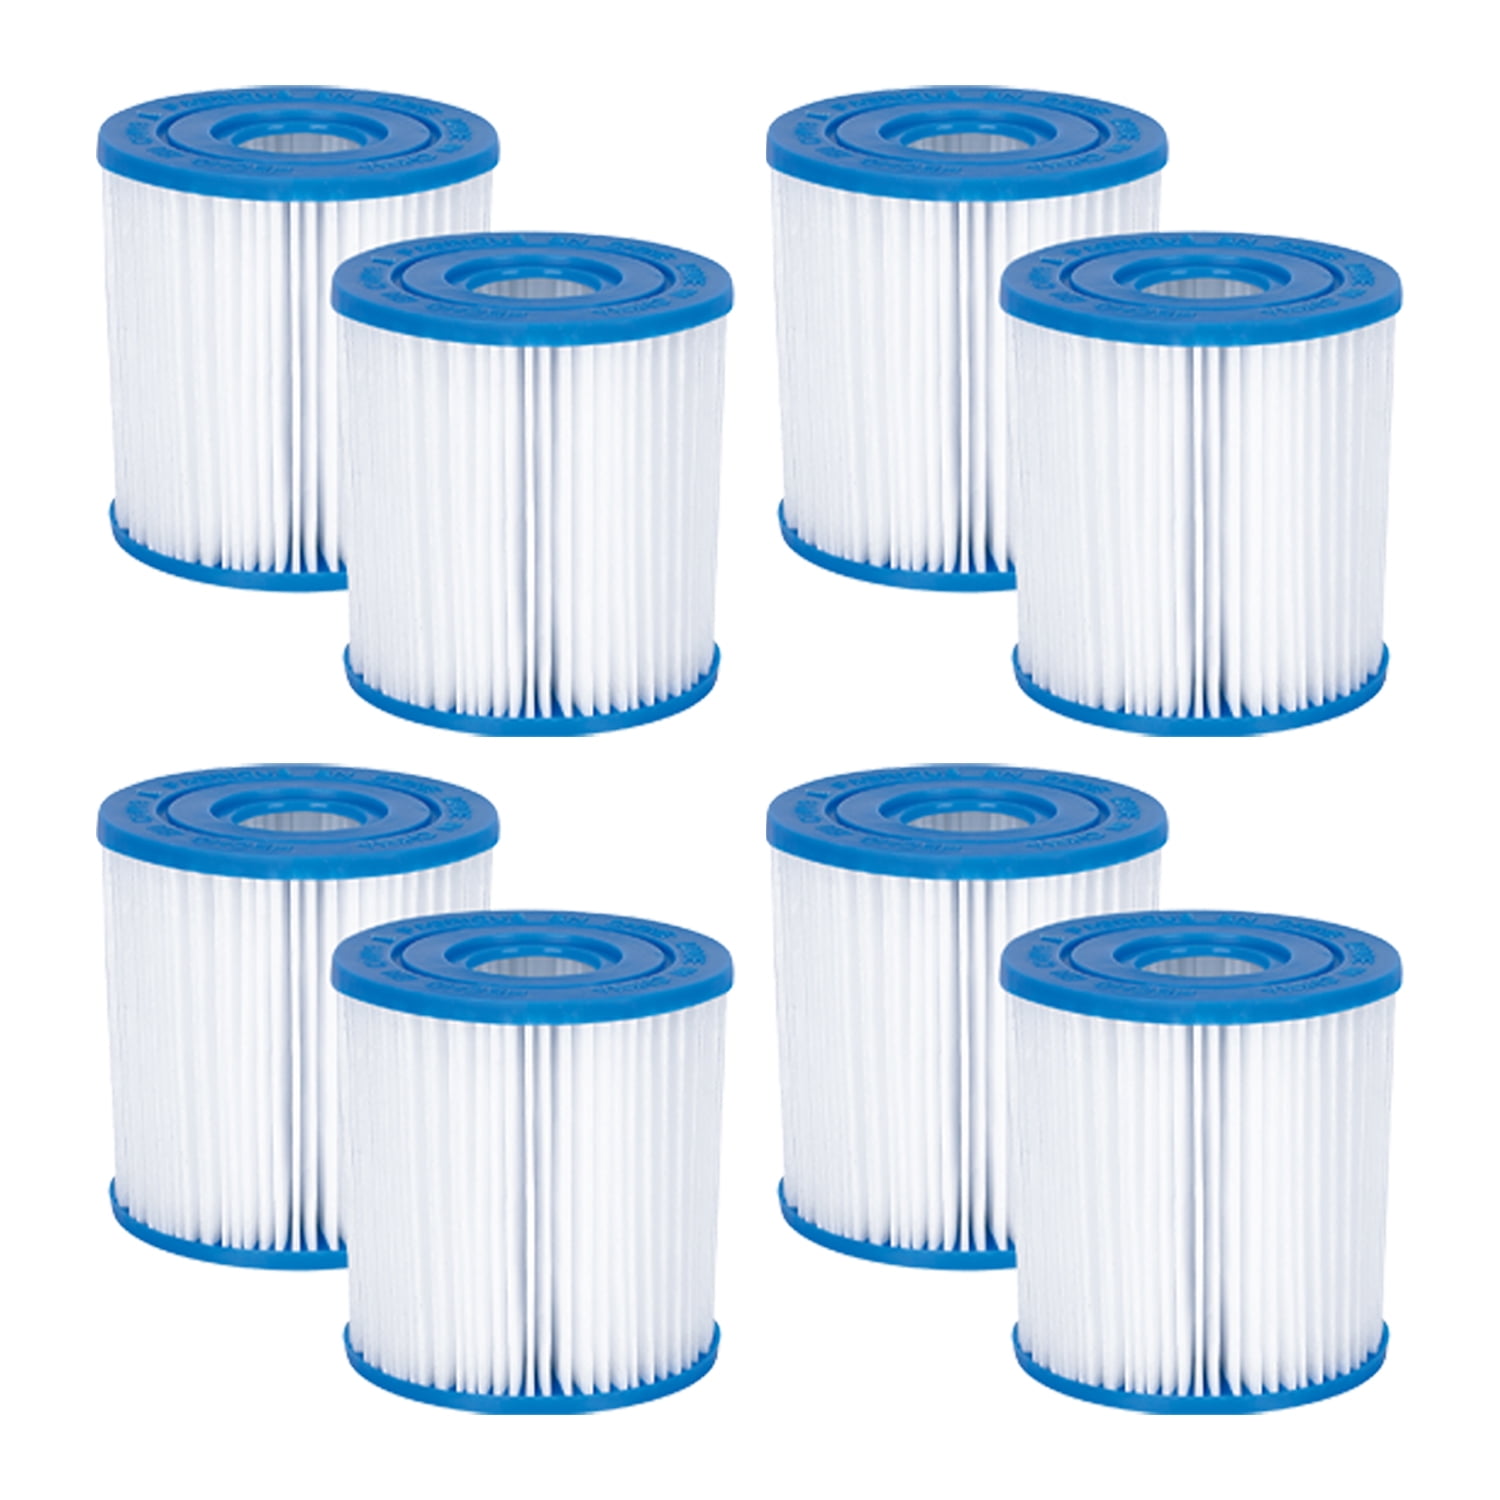 4 Pack Details about   Summer Waves P57000302 Replacement Type B Pool and Spa Filter Cartridge 